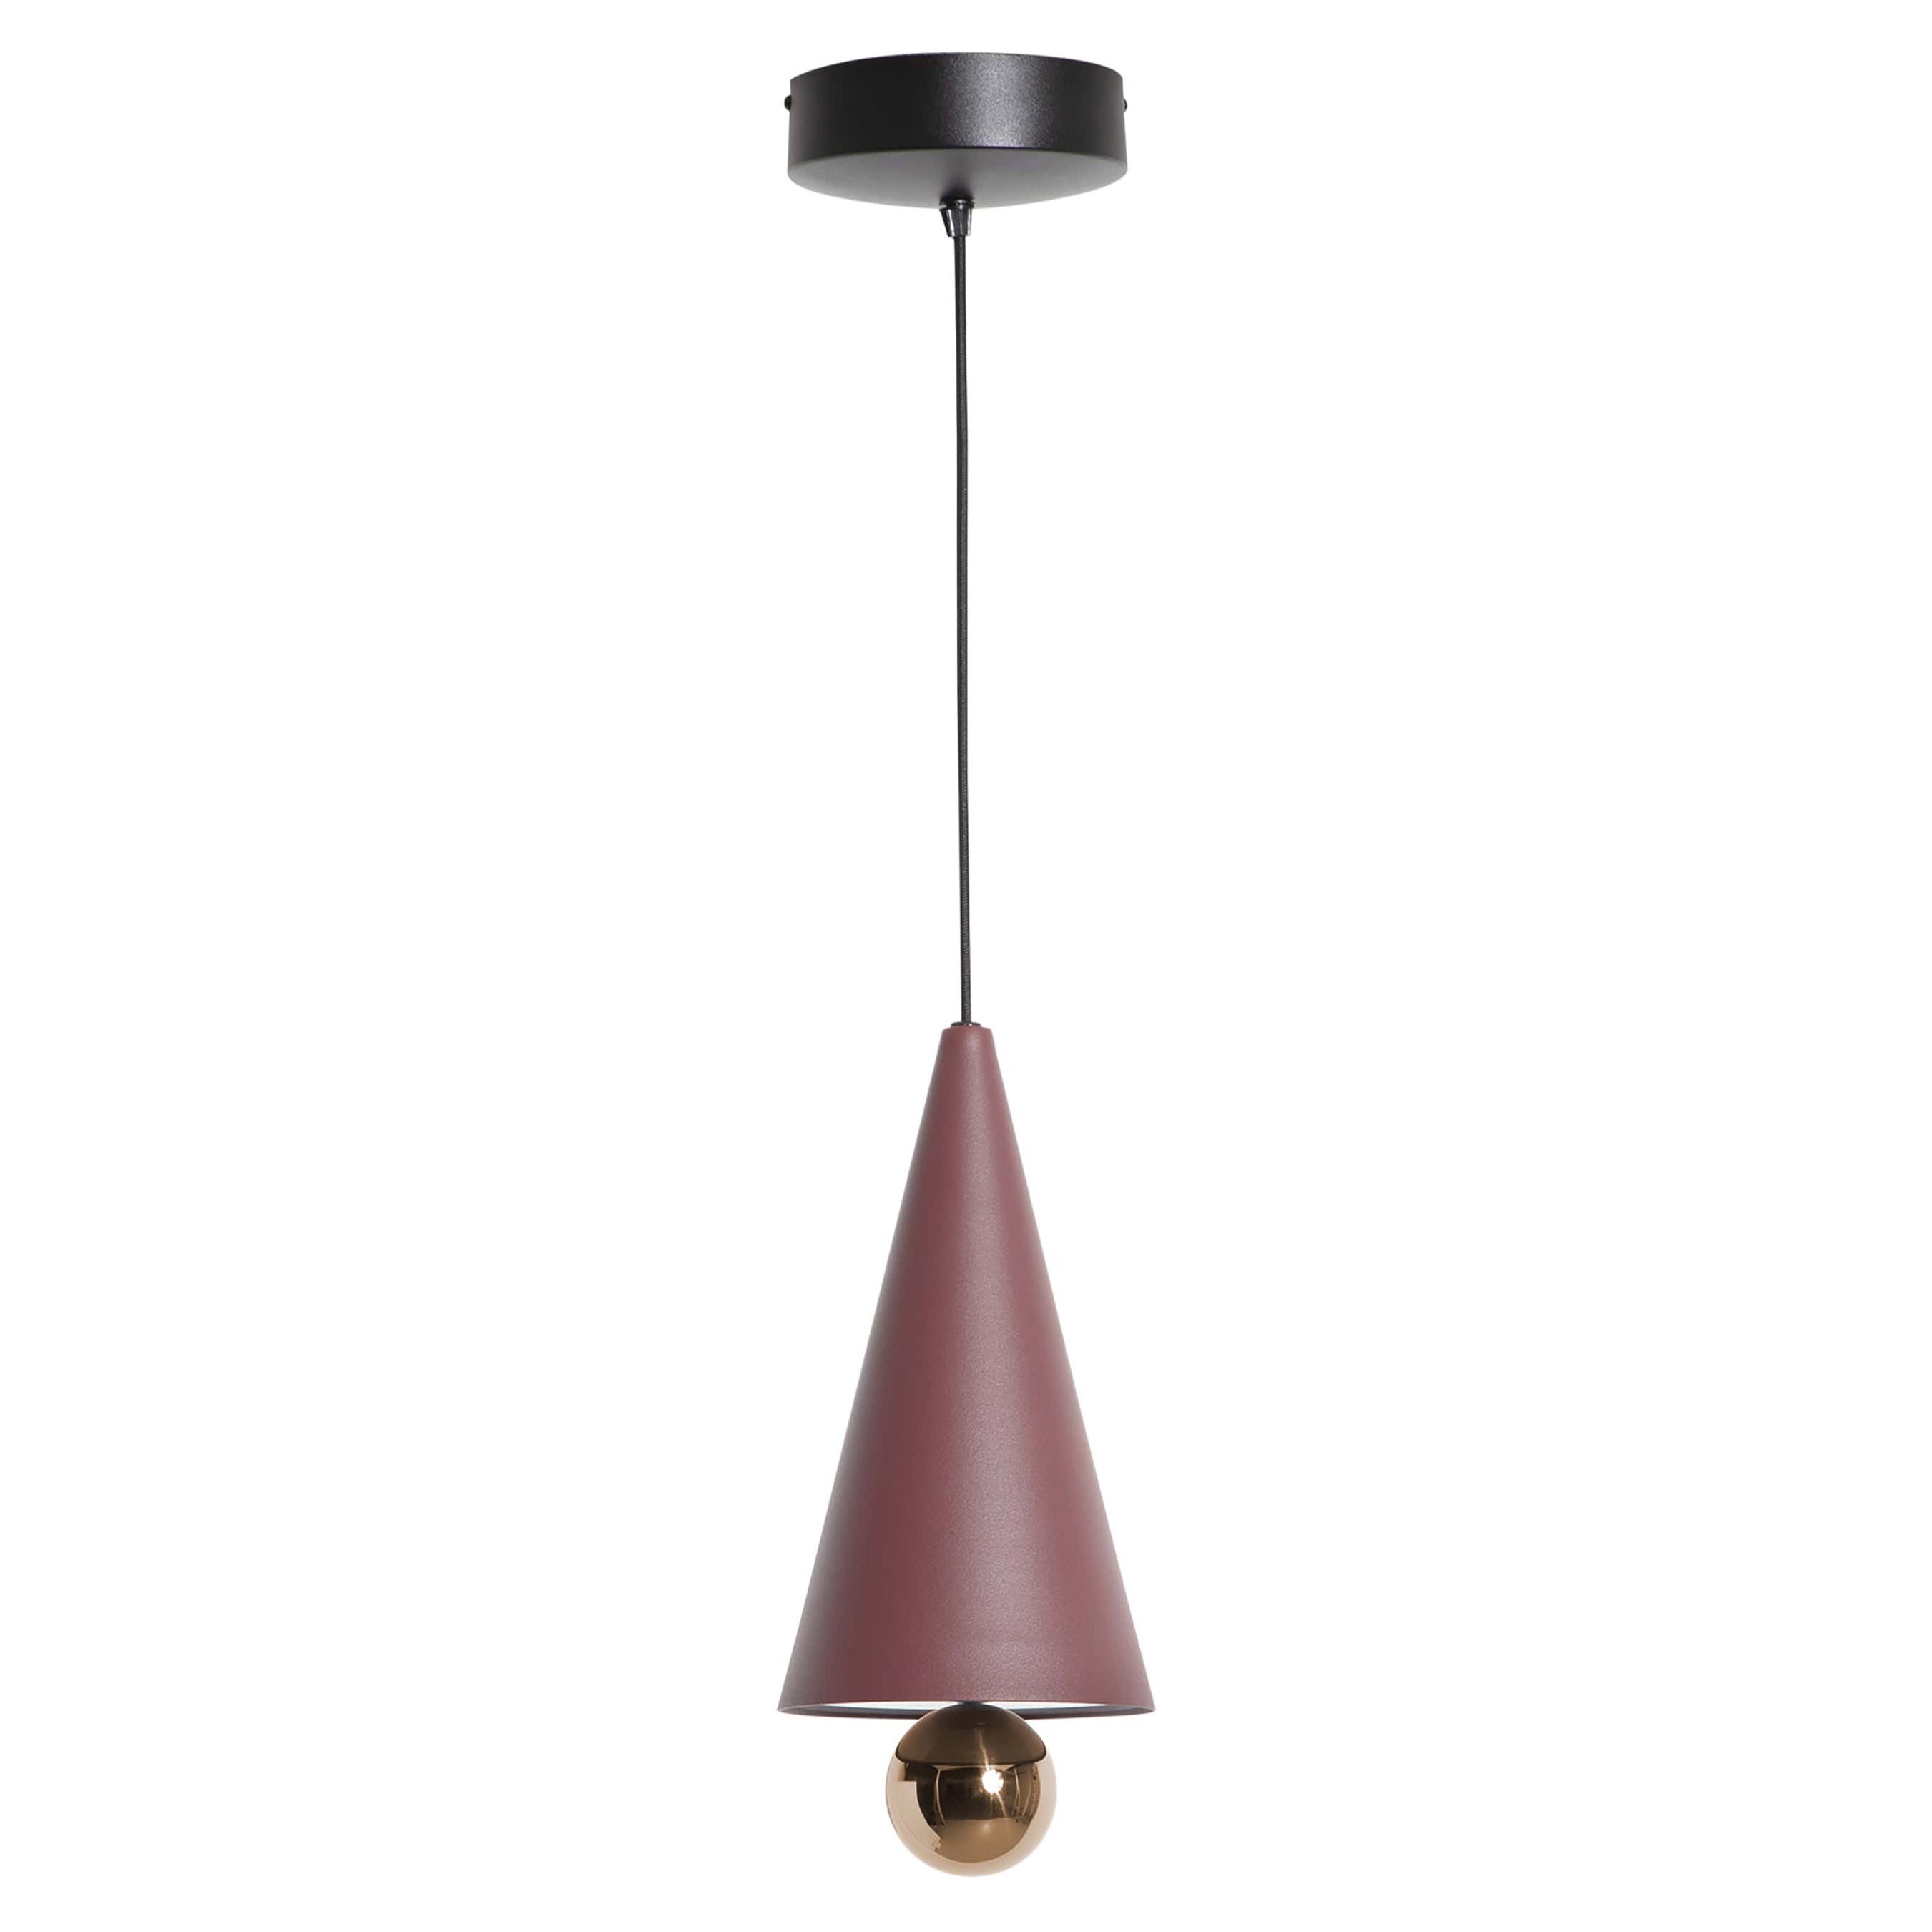 Petite Friture Small Cherry LED Pendant Light in Brown-Red & Pink Gold Aluminium For Sale